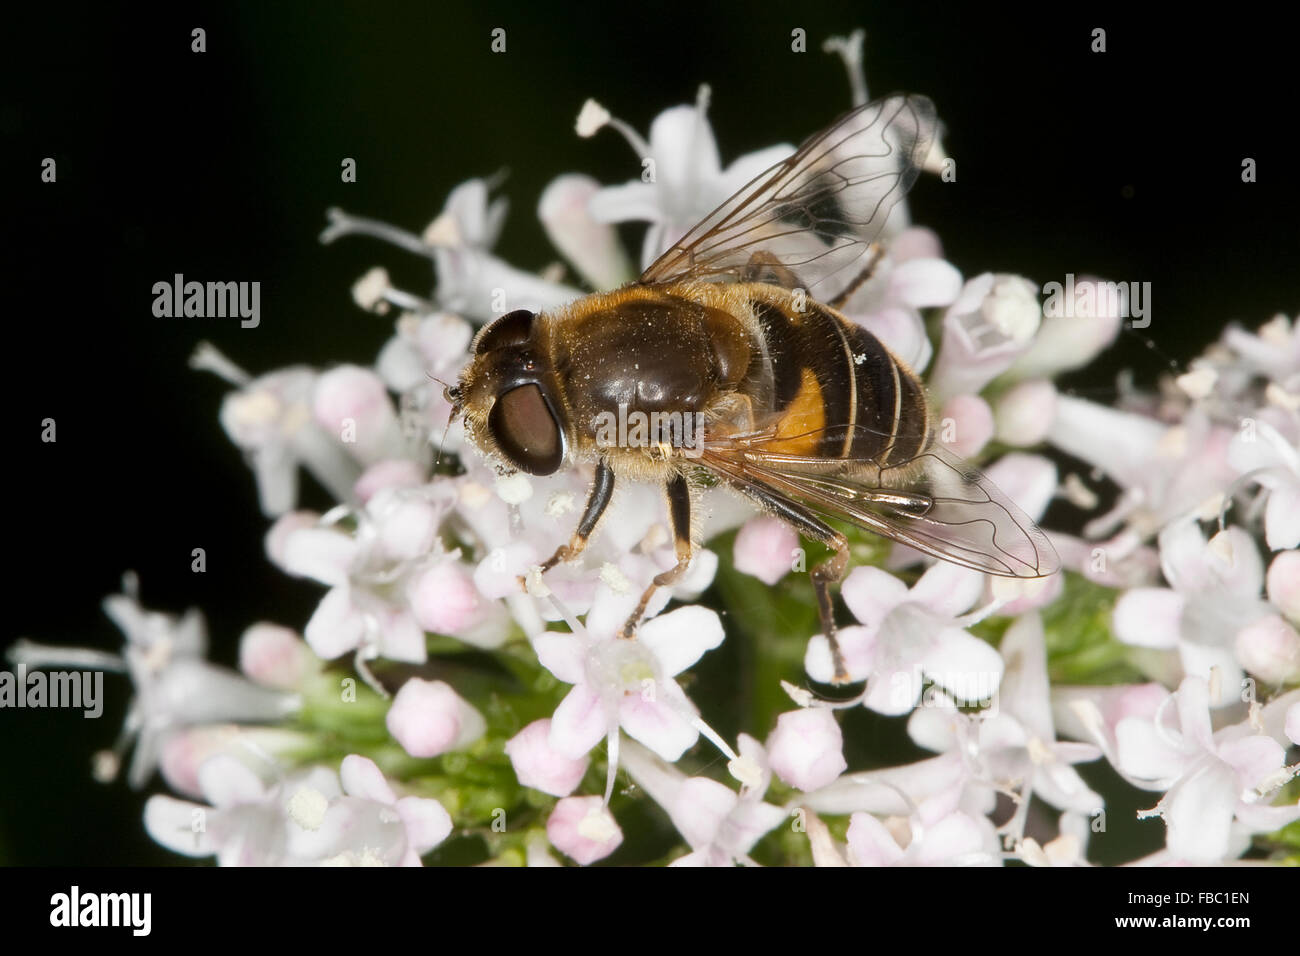 Drone moindre fly hoverfly, kleine, Bienen-Schwebfliege Bienenschwebfliege, kleine, Eristalis arbustorum, Blütenbesuch Banque D'Images